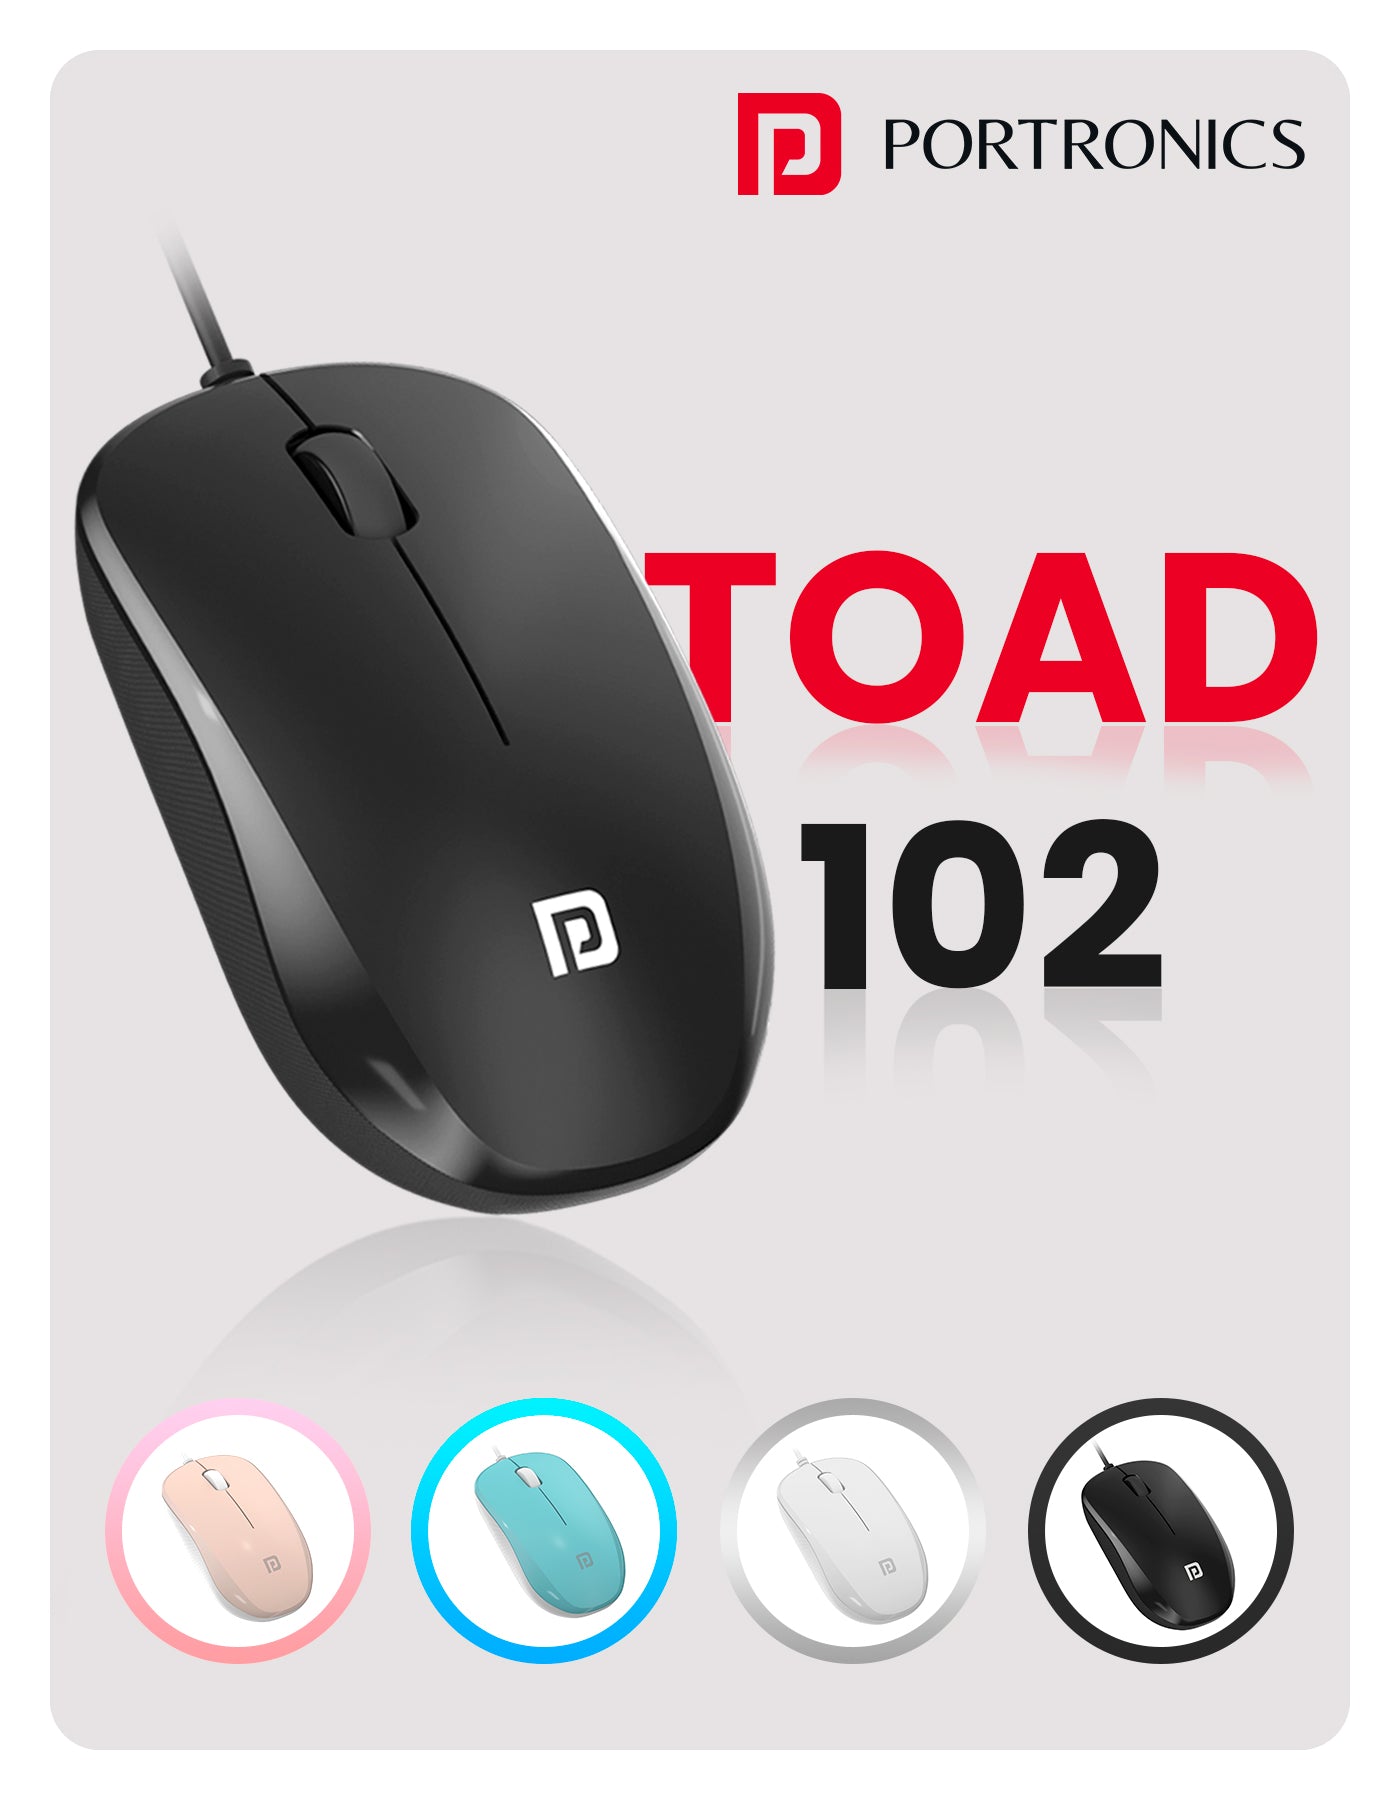 PortronicsToad 102 wired mouse with responsive 1600 DPI highly sensitive